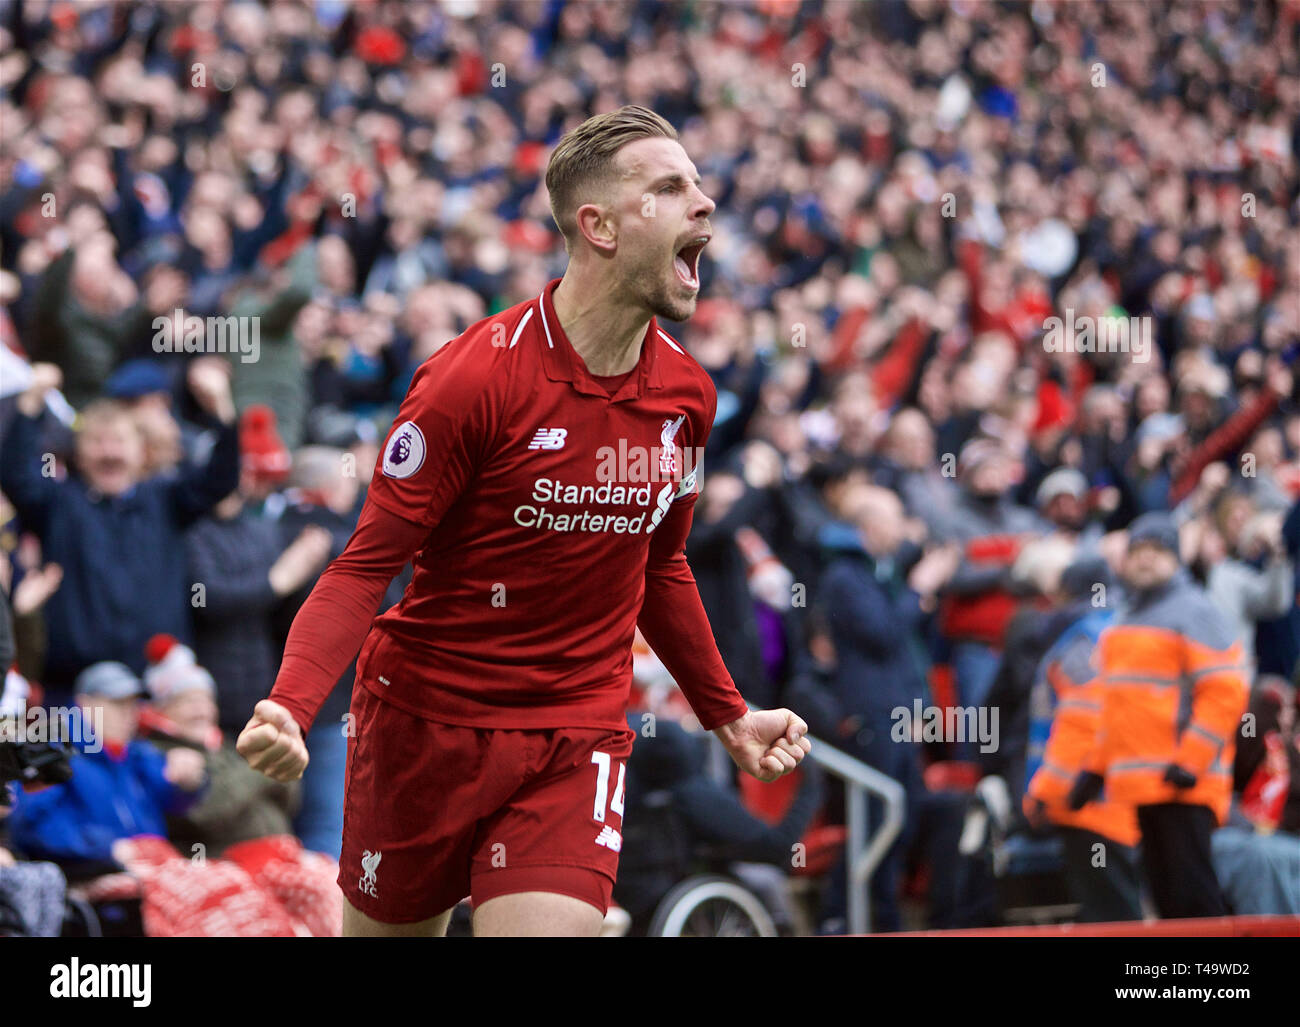 Liverpool. 15th Apr, 2019. Liverpool's Jordan Henderson celebrates team's goal during English Premier League match between Liverpool FC and Chelsea FC at Anfield in Liverpool, Britain on April 14, 2019. Liverpool won 2-0. Credit: Xinhua/Alamy Live News Stock Photo